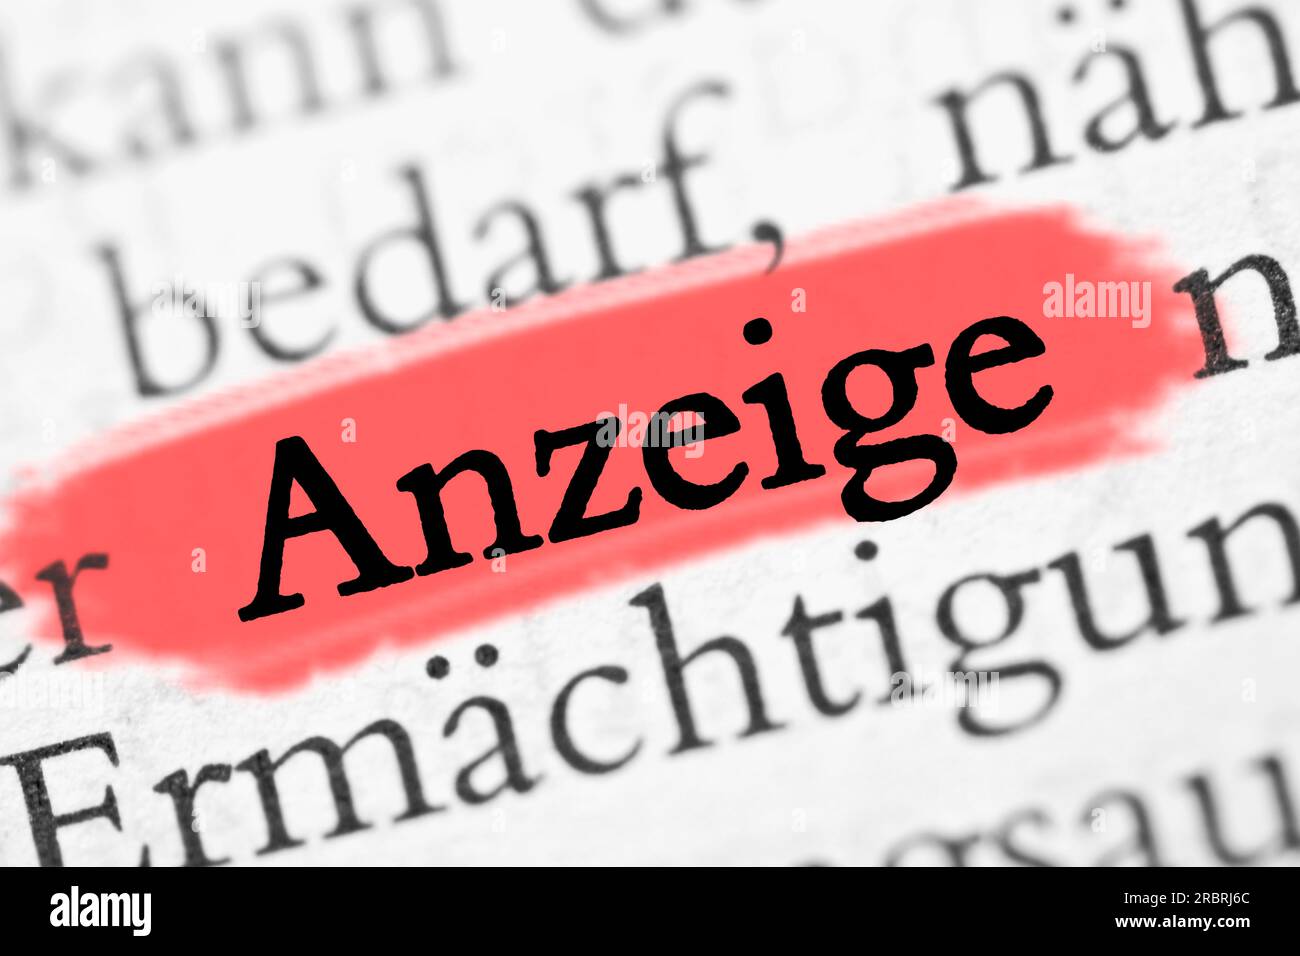 Anzeige is the german word for complaint Stock Photo